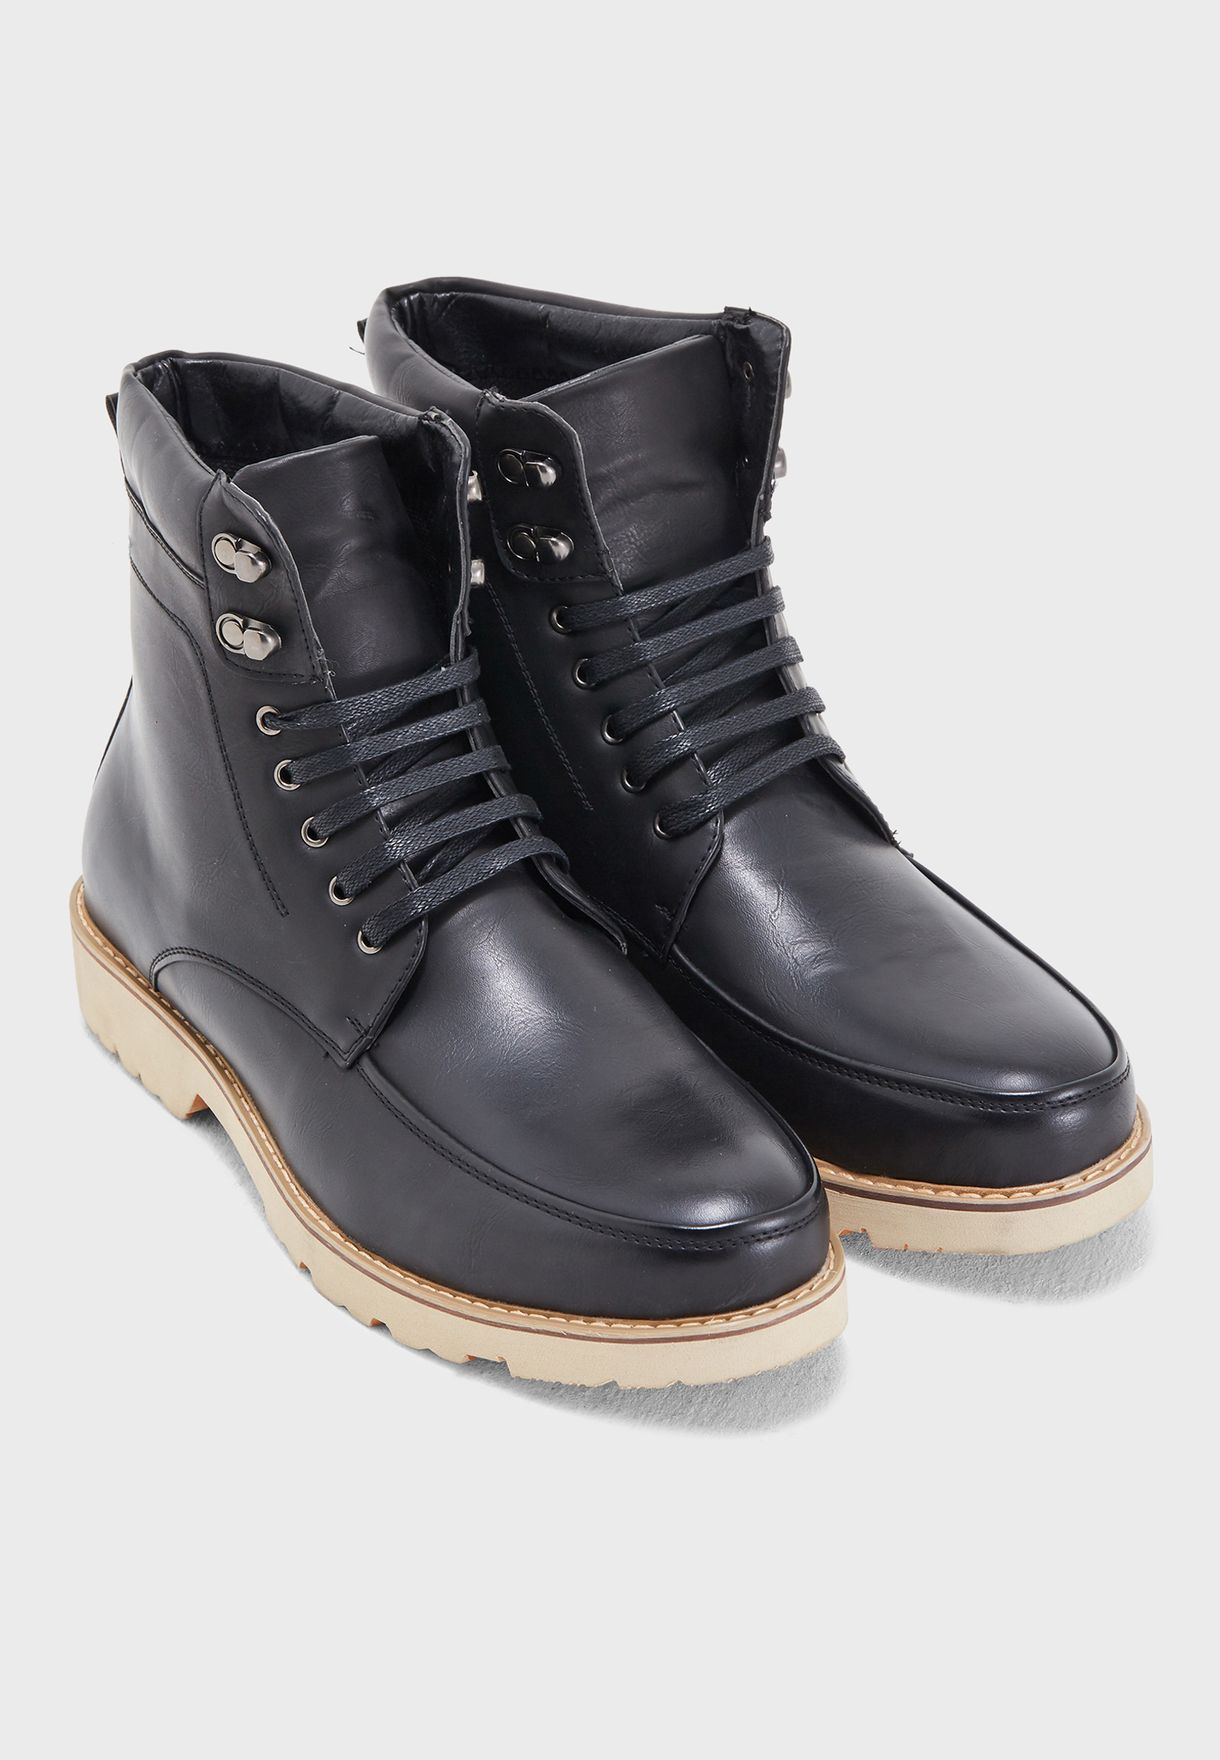 Casual Worker Boots